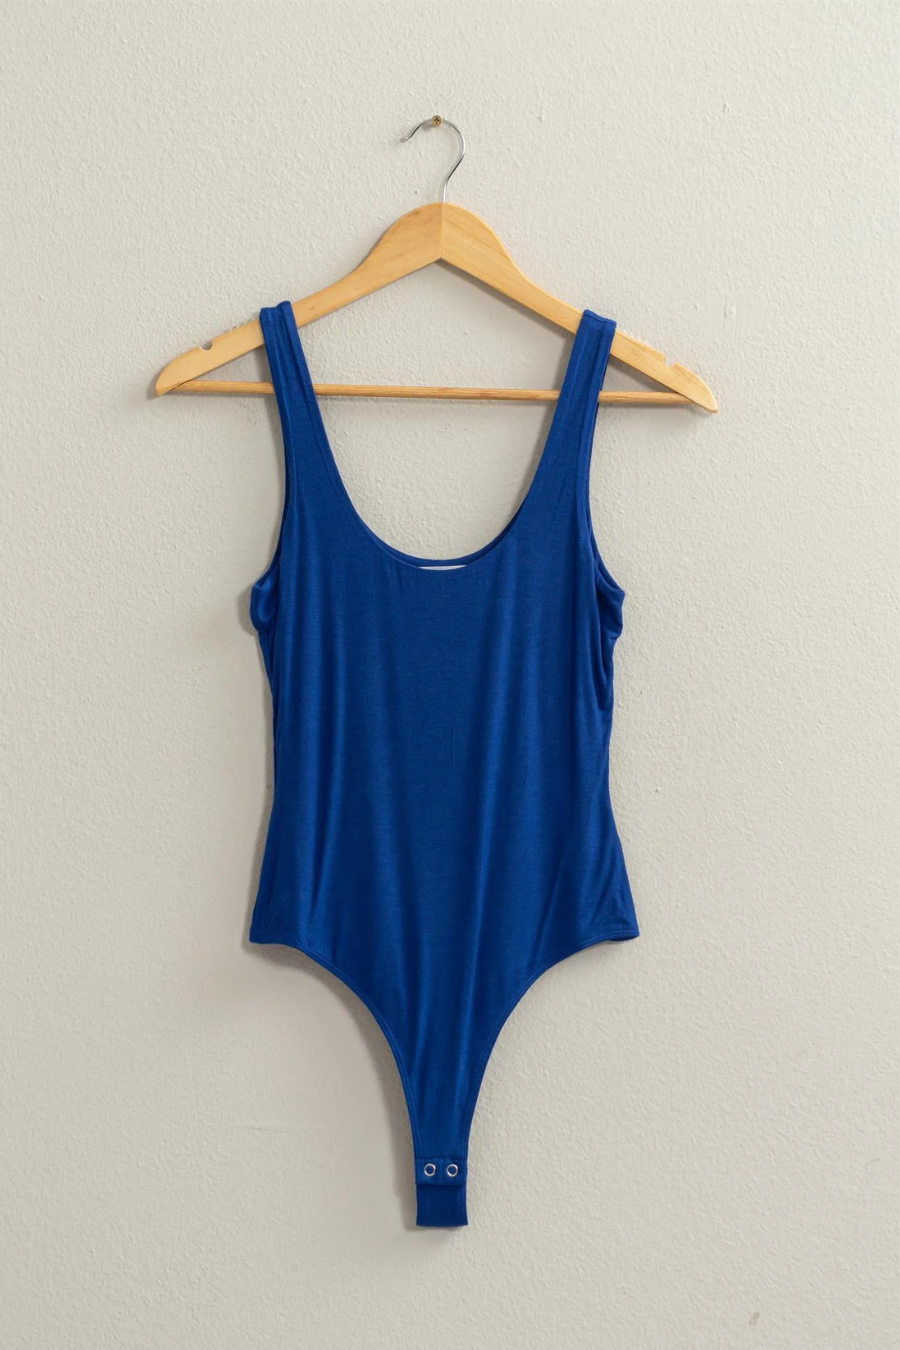 full front view of the Brinkley scoop bodysuit in the color blue, hanging on a wooden hanger